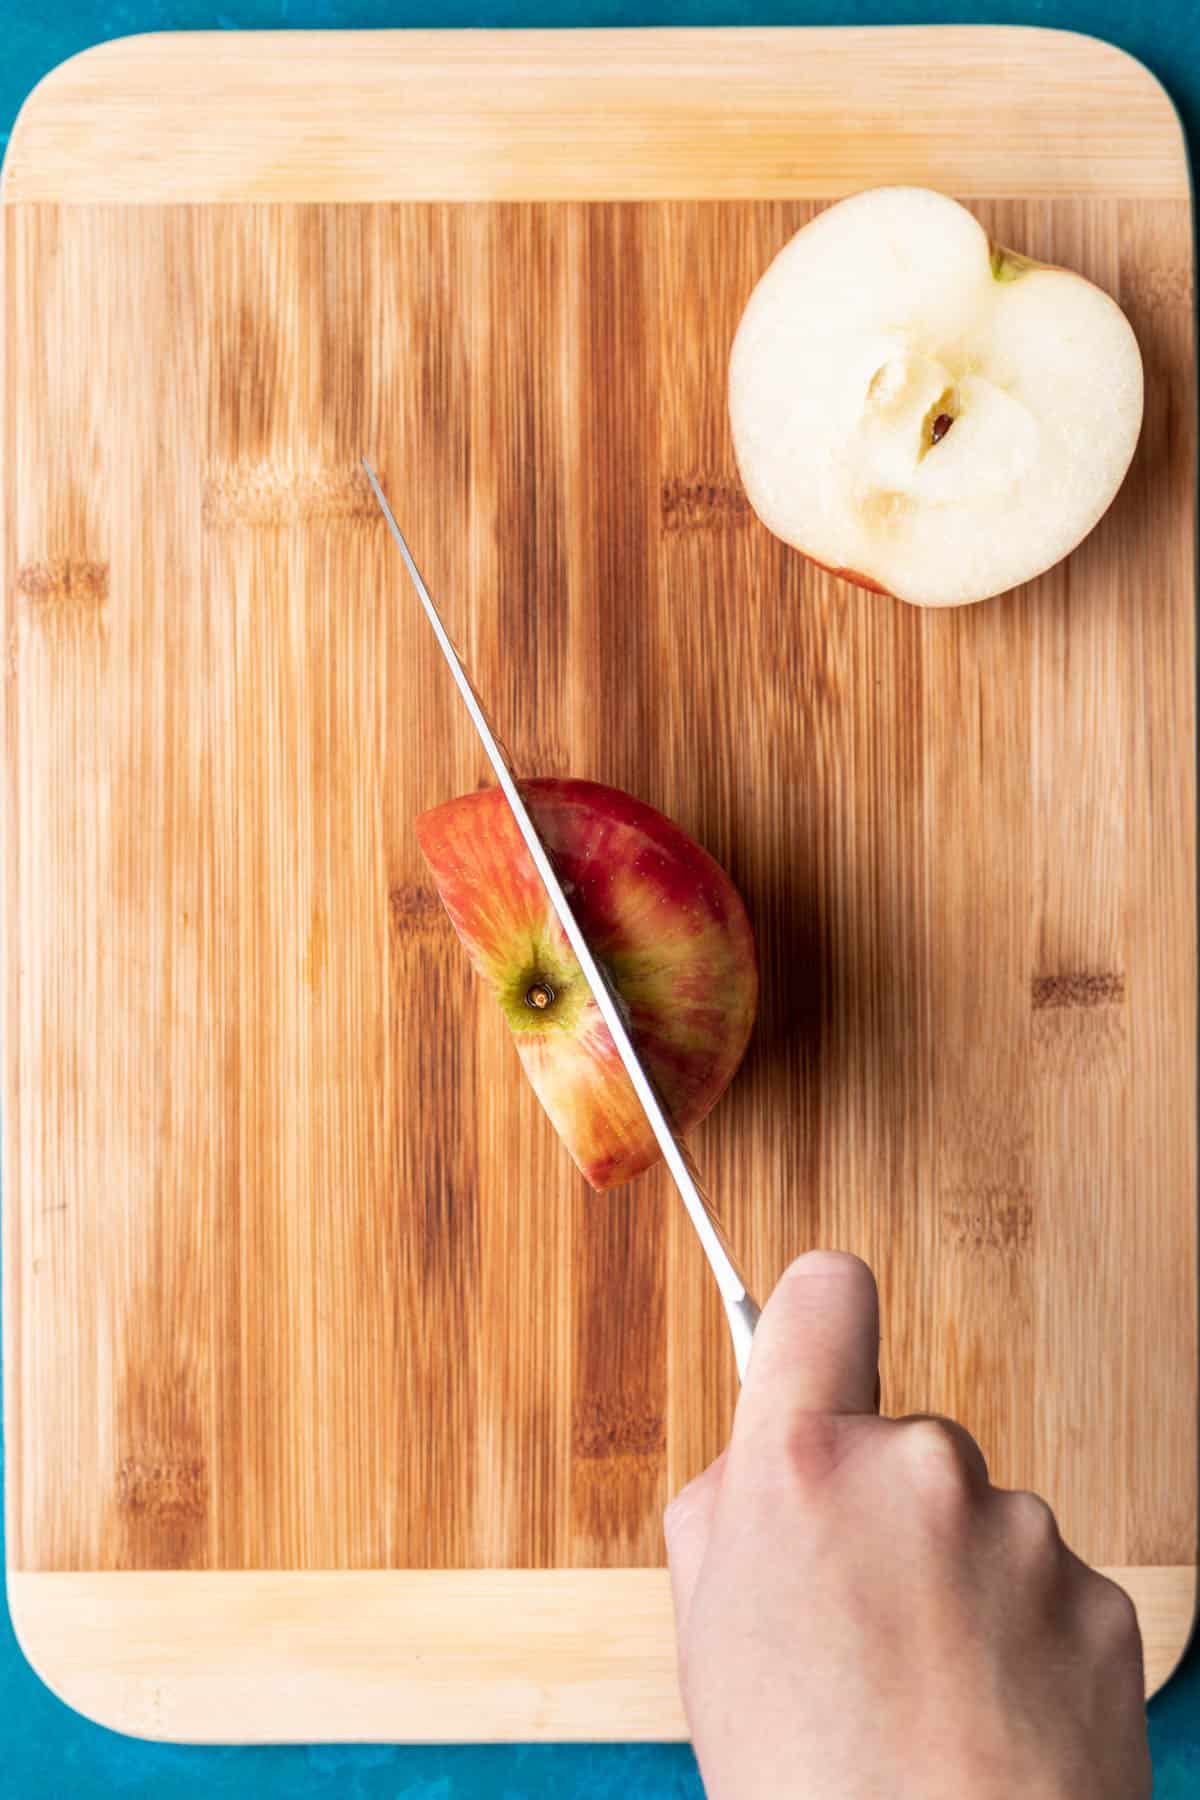 A knife cutting the sides off the apple.